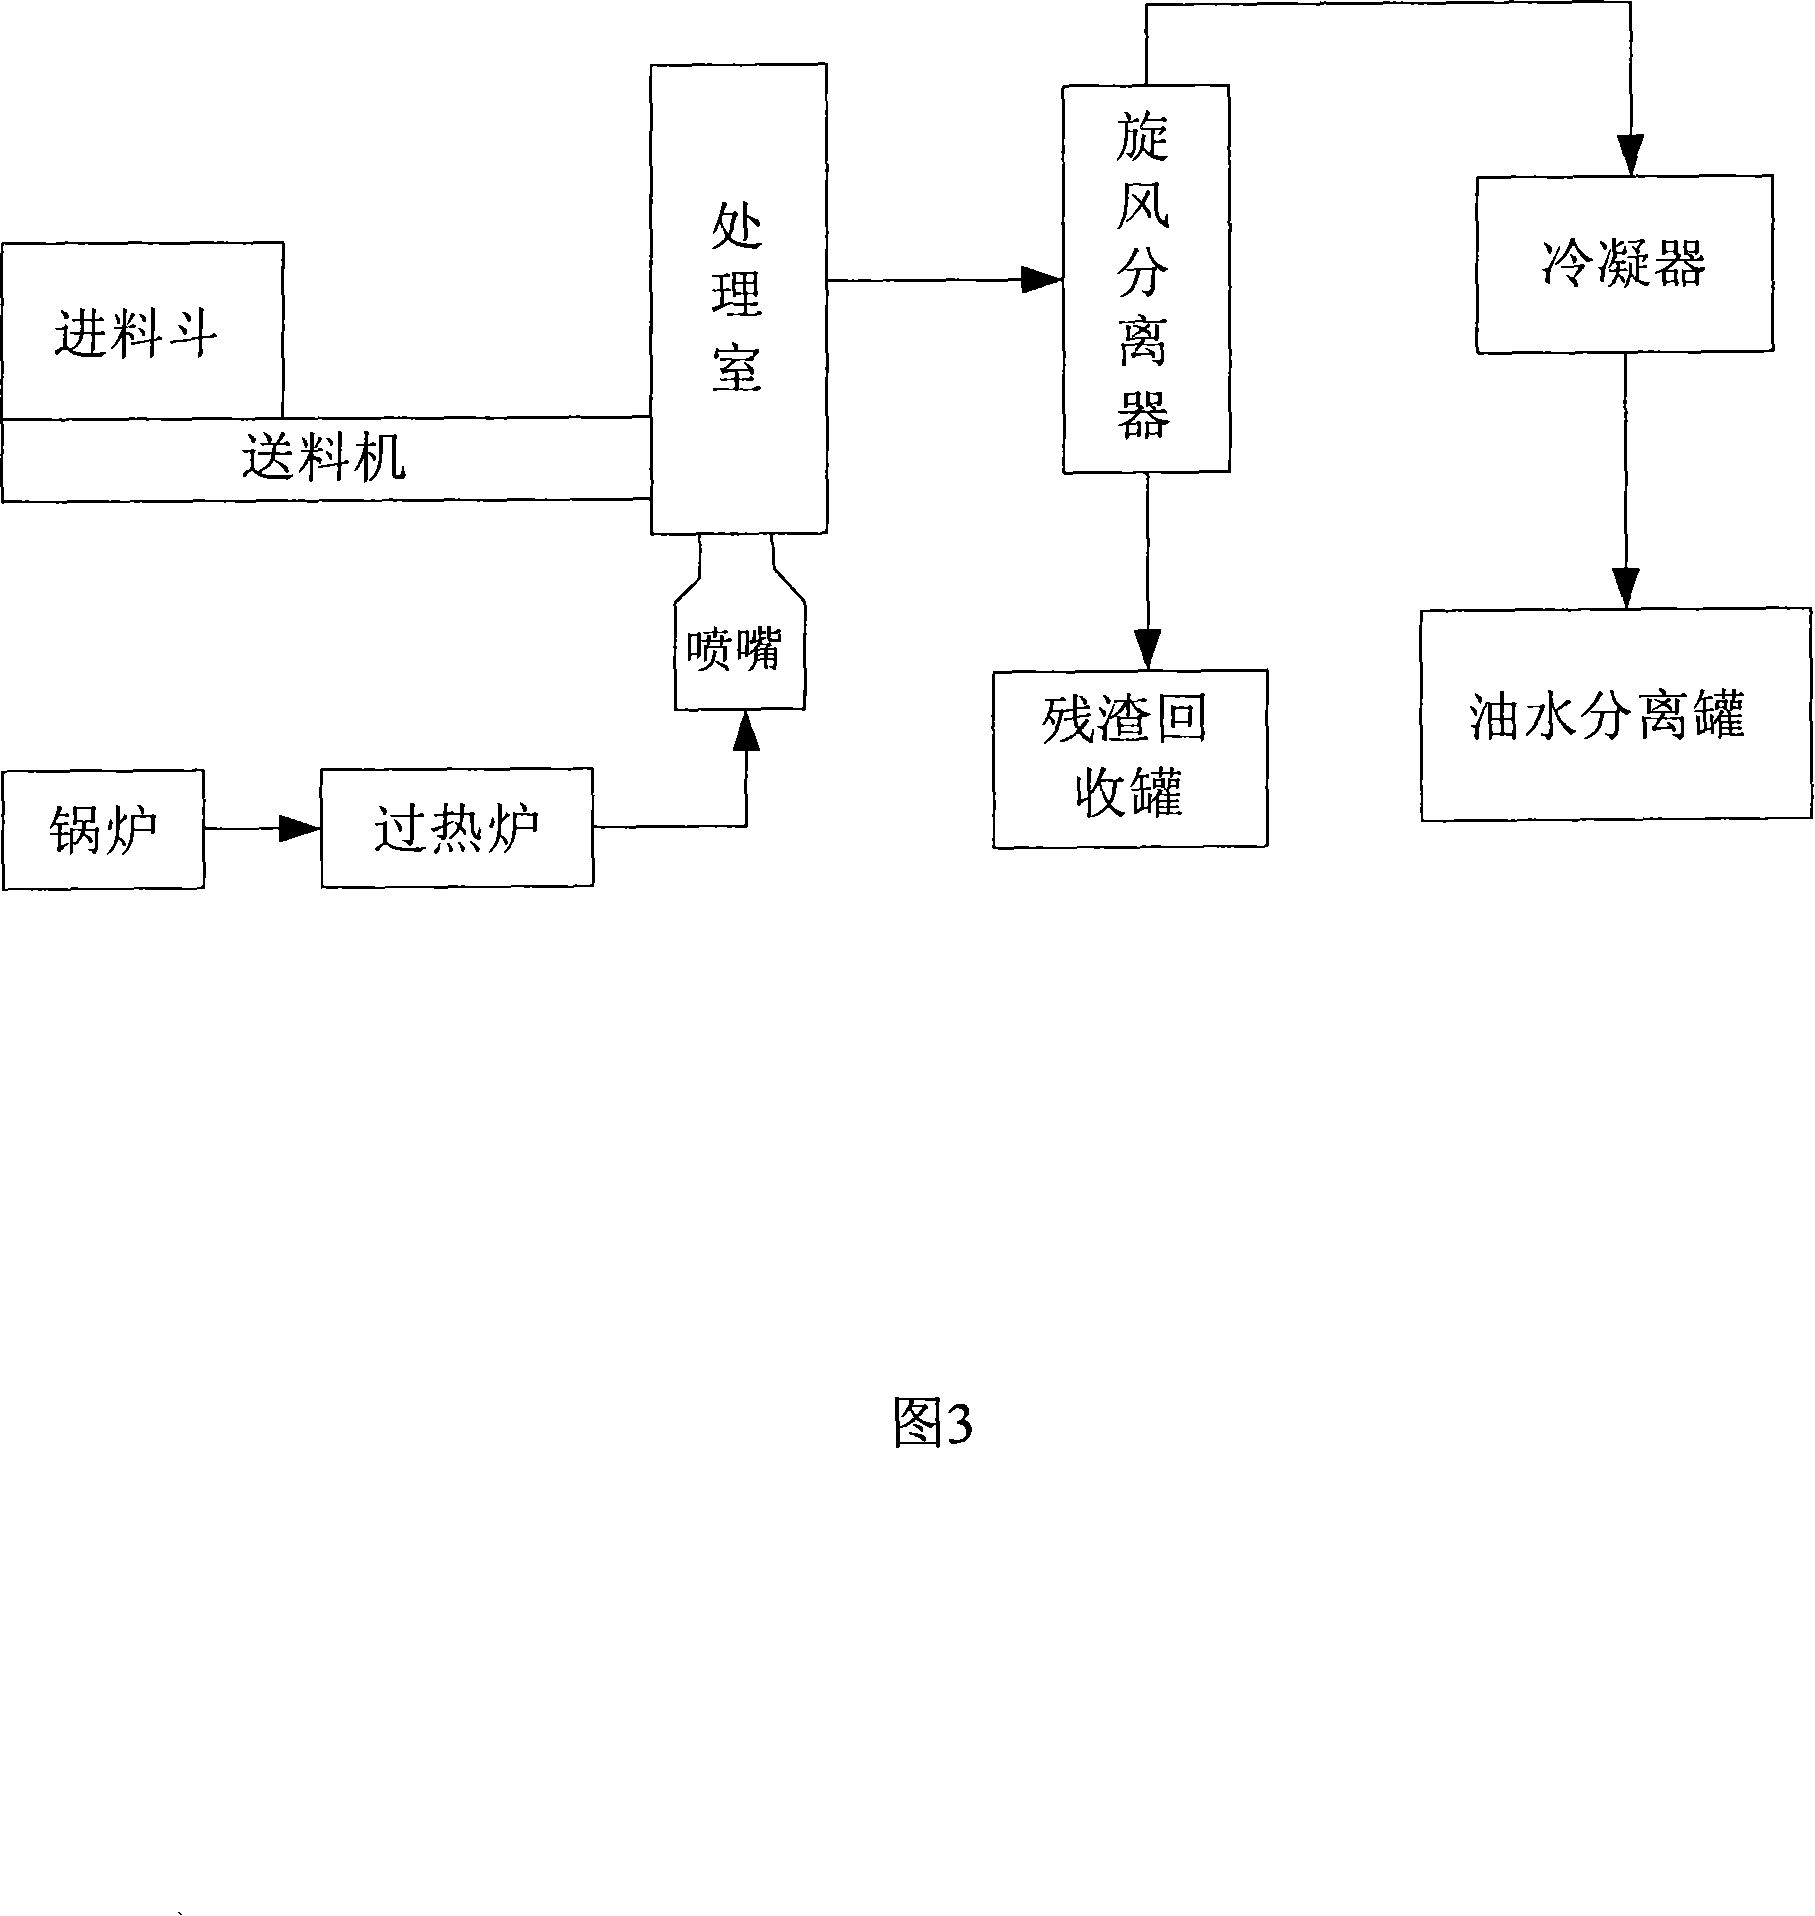 Process for treating oil-containing sludge